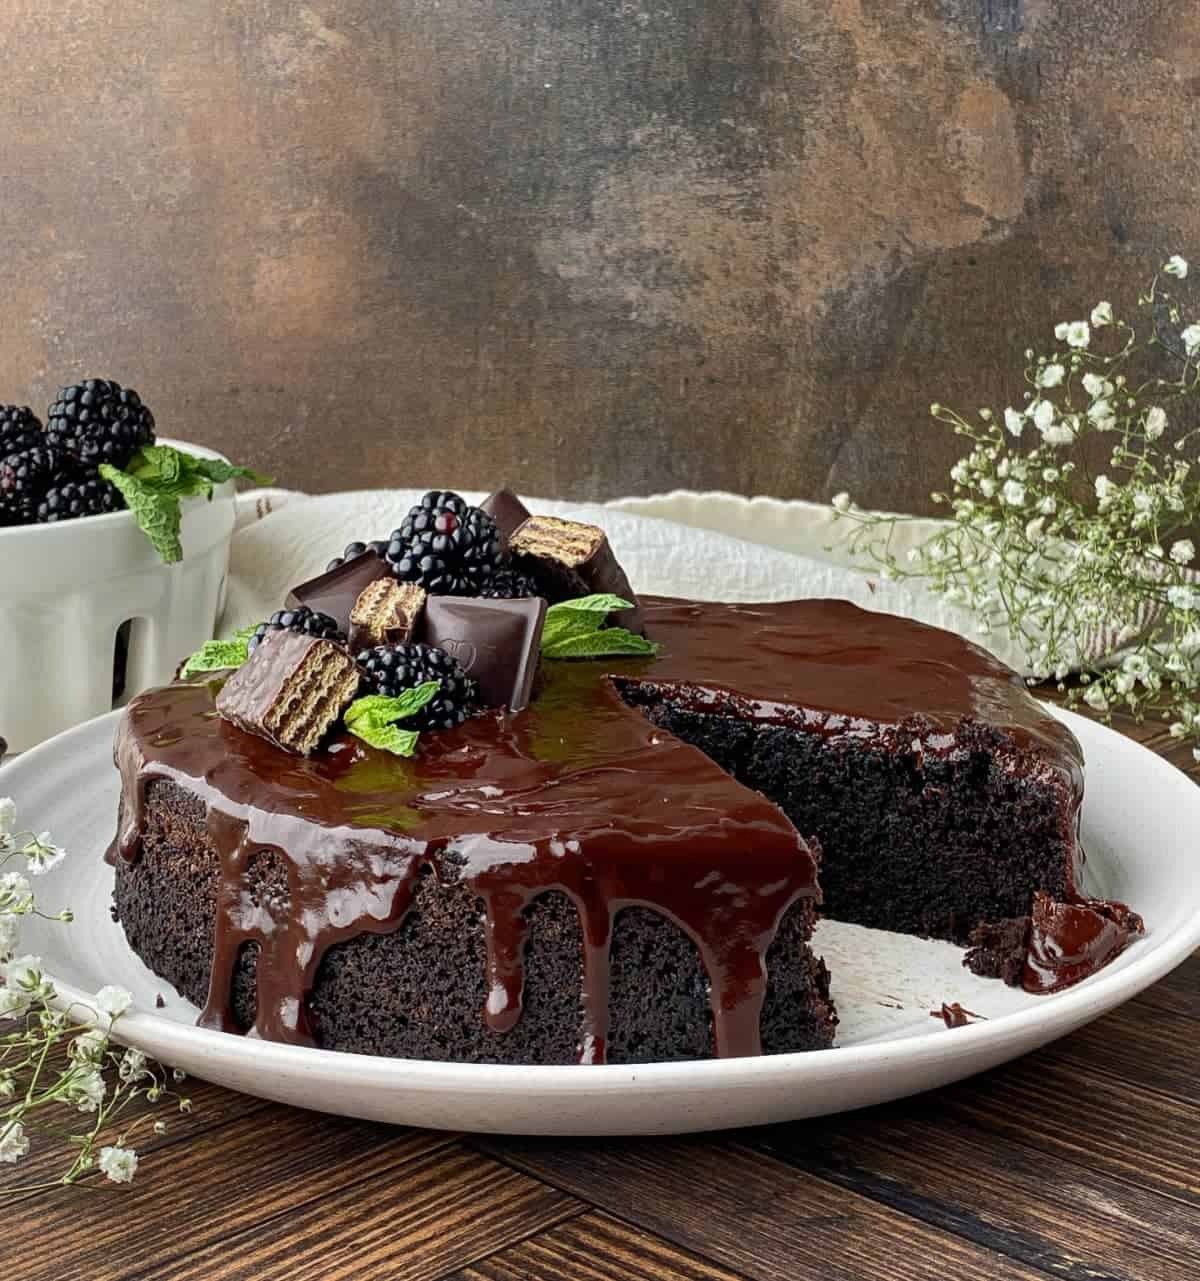 Sliced Chocolate Ganache Cake with chocolate, blackberries, and fresh mint on top.